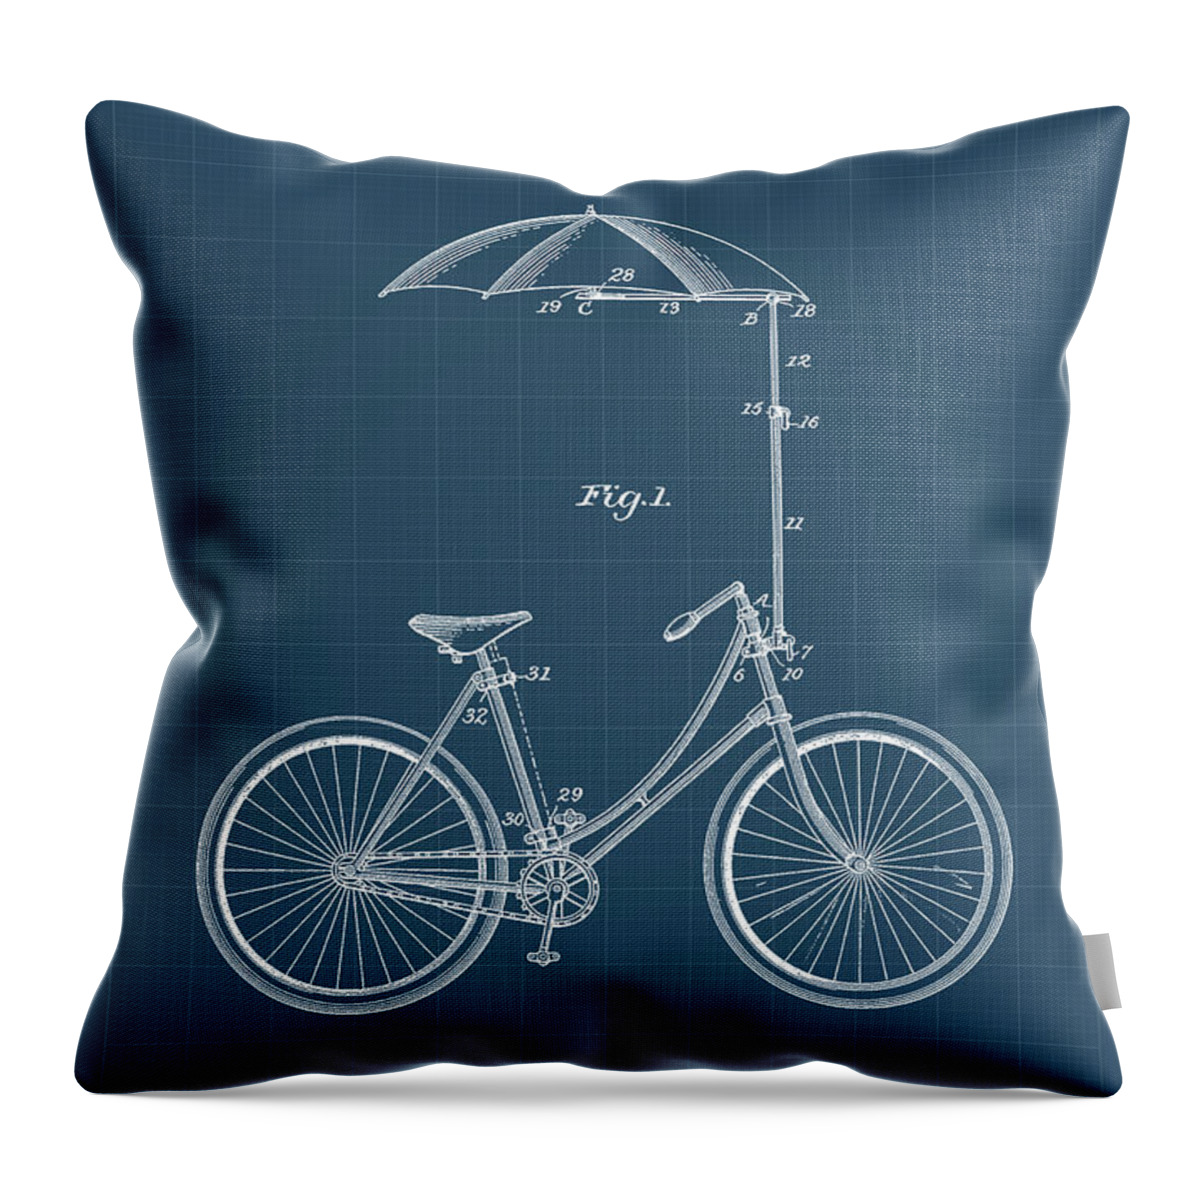 Bicycle Throw Pillow featuring the digital art Bicycle parasol blueprints by Dennson Creative